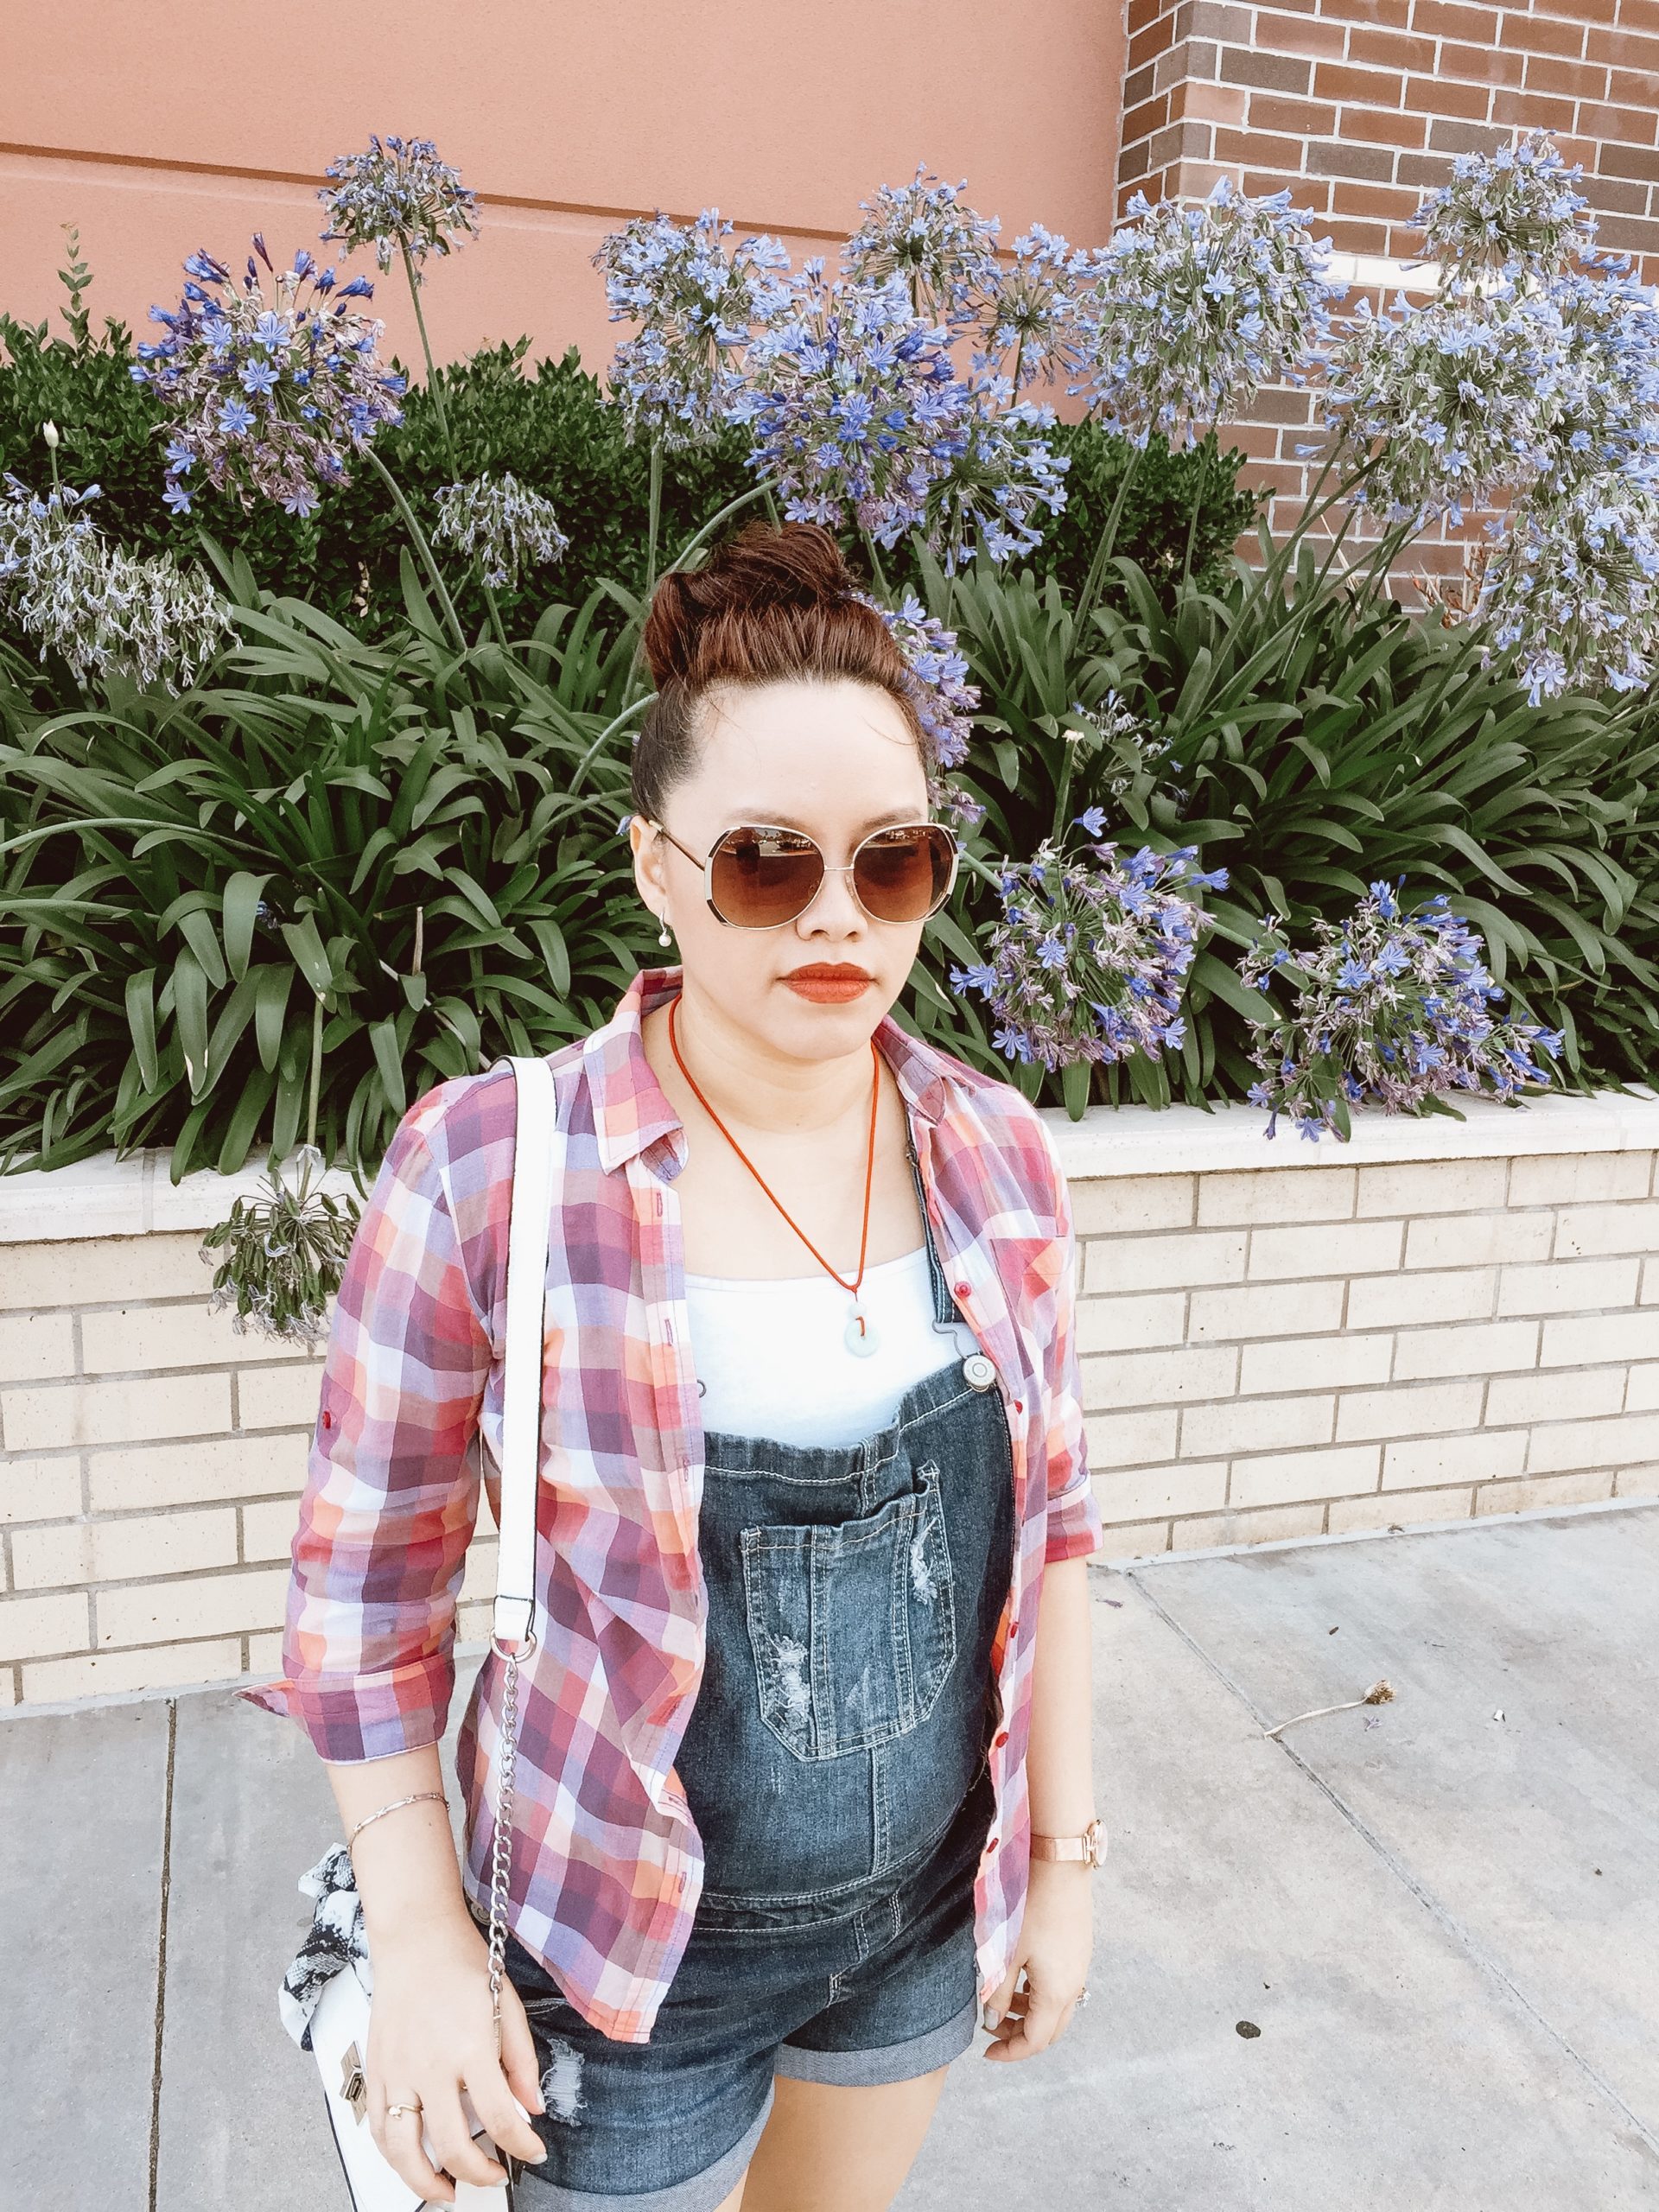 instagram-pslilyboutique-pinterest-purple-flowers-LA-fashion-blog-red-alima-pure-lipstick-white-pearl-drop-earrings-white-express-camisole-lucky-brand-top-knot-hair-summer-2019-outfit-ideas-7-9-19